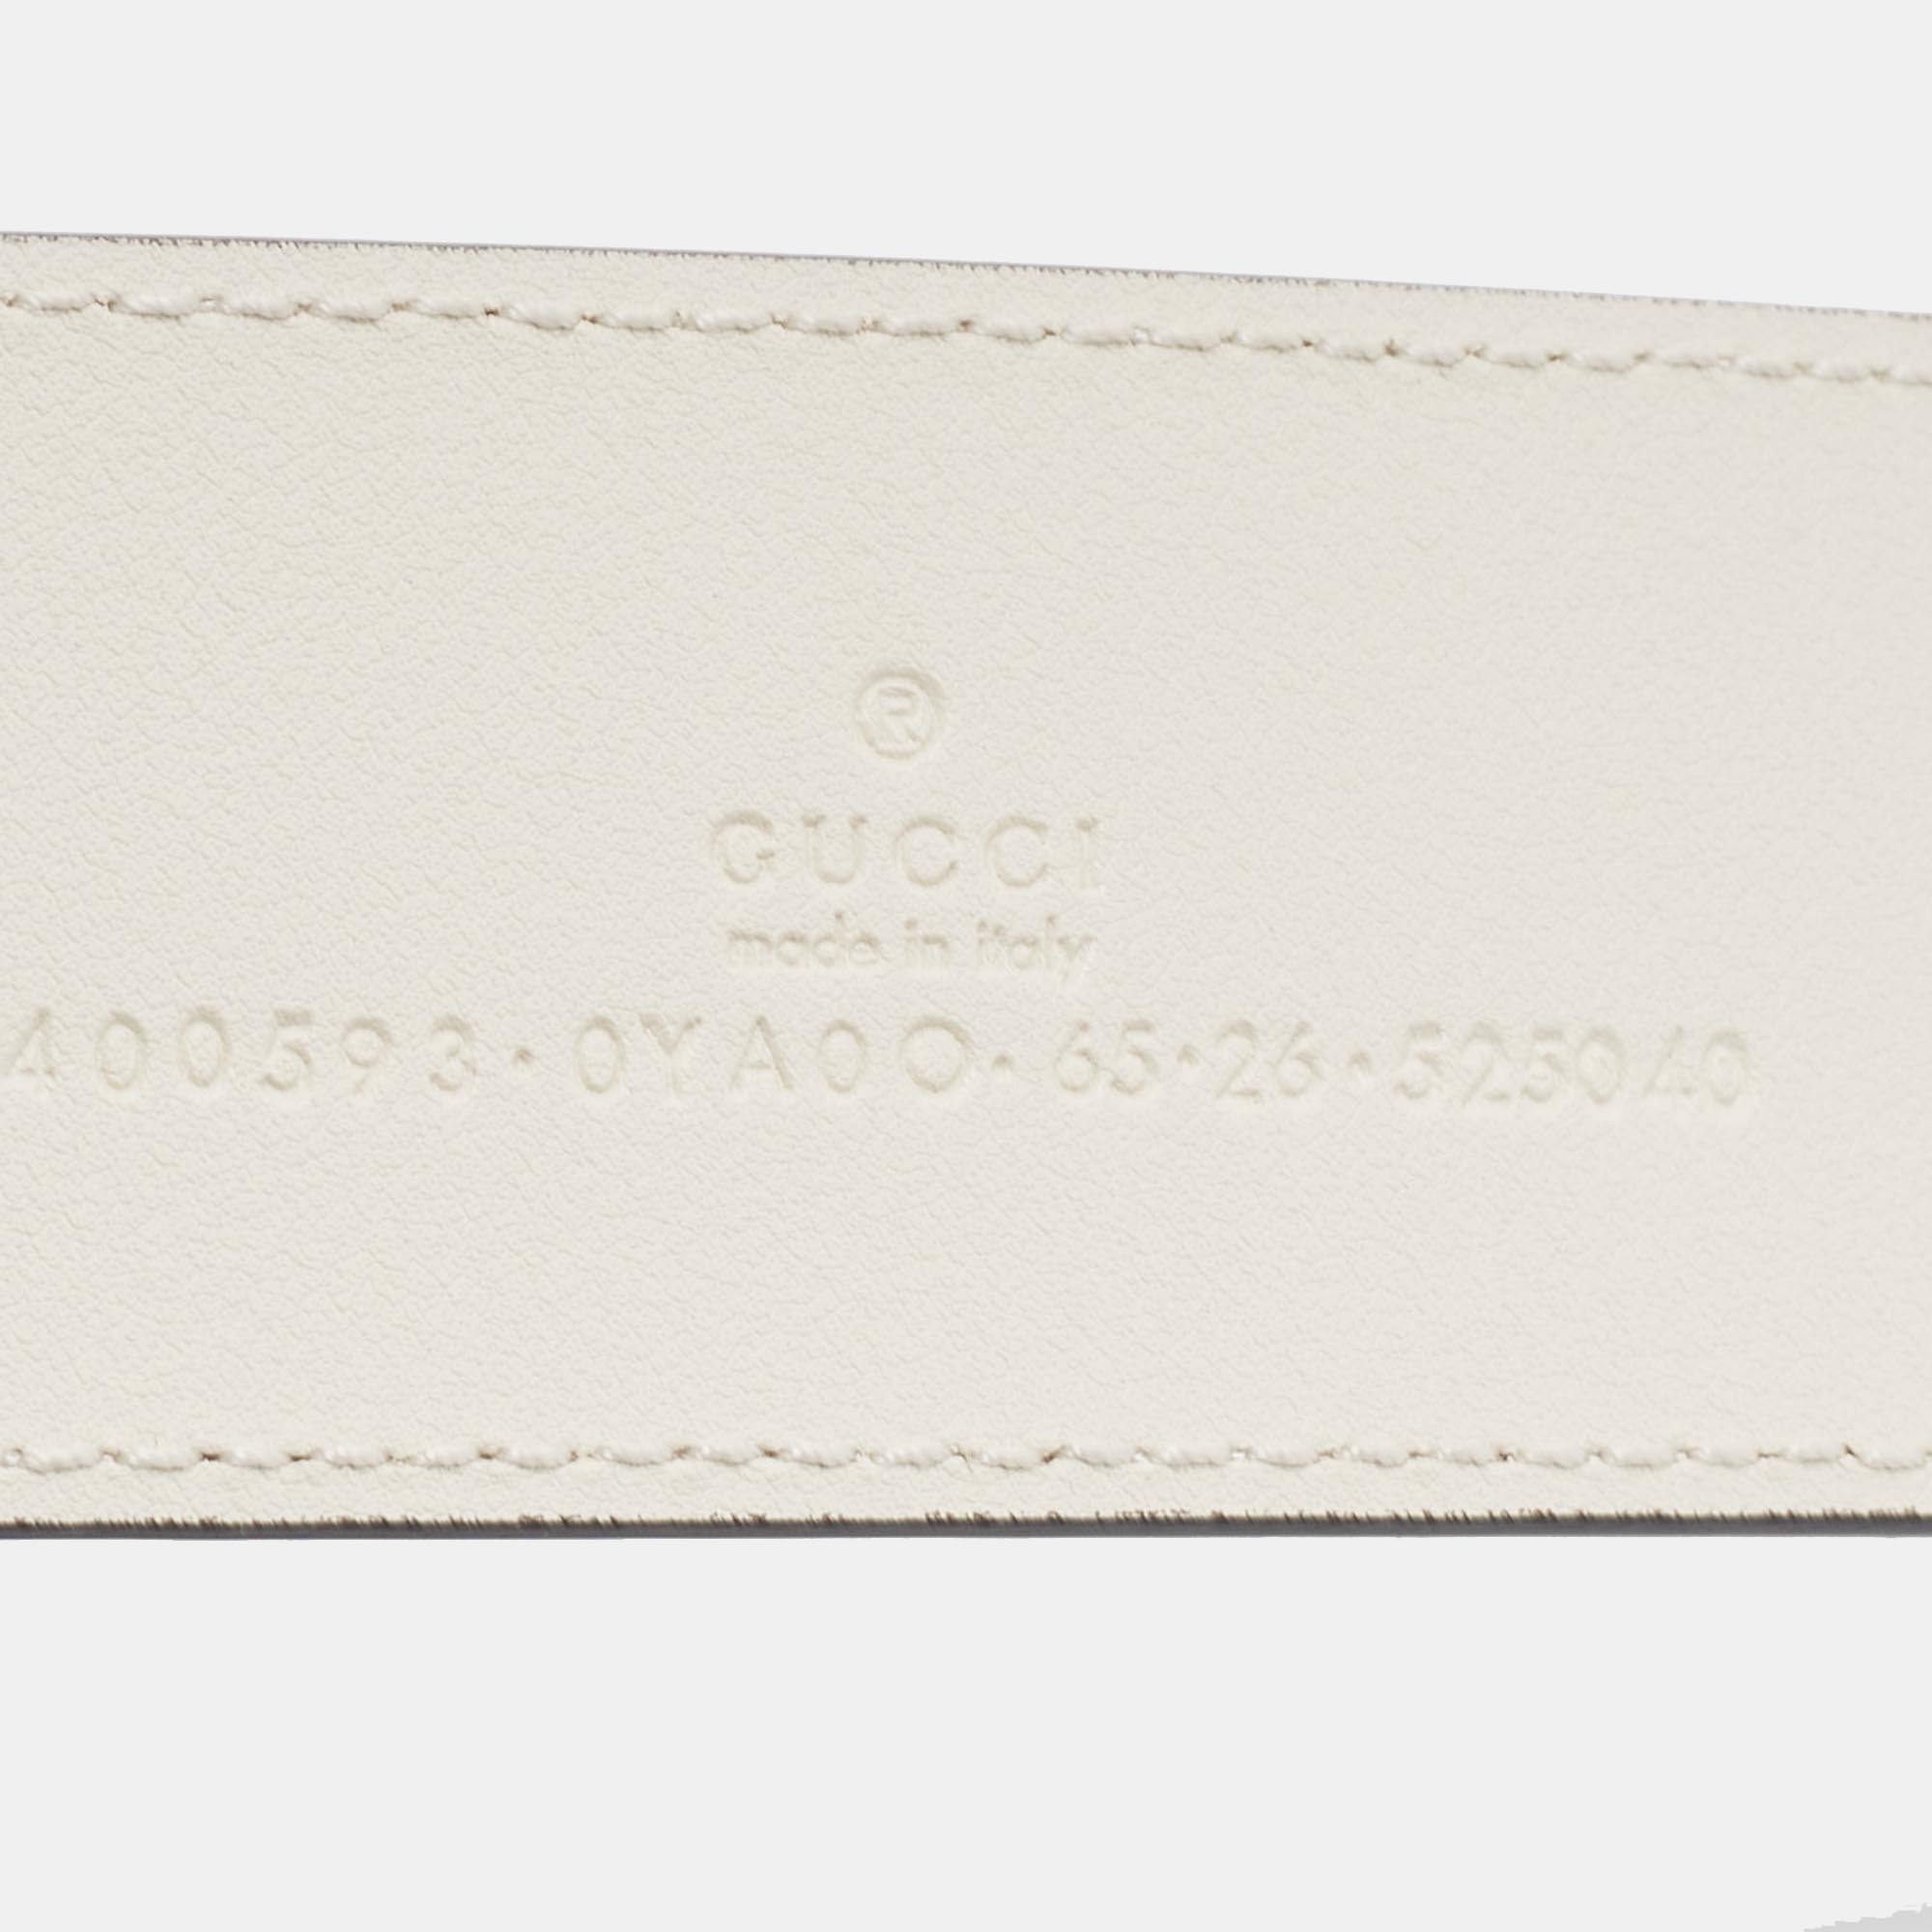 Gucci Off White Leather GG Marmont Buckle Belt 65CM